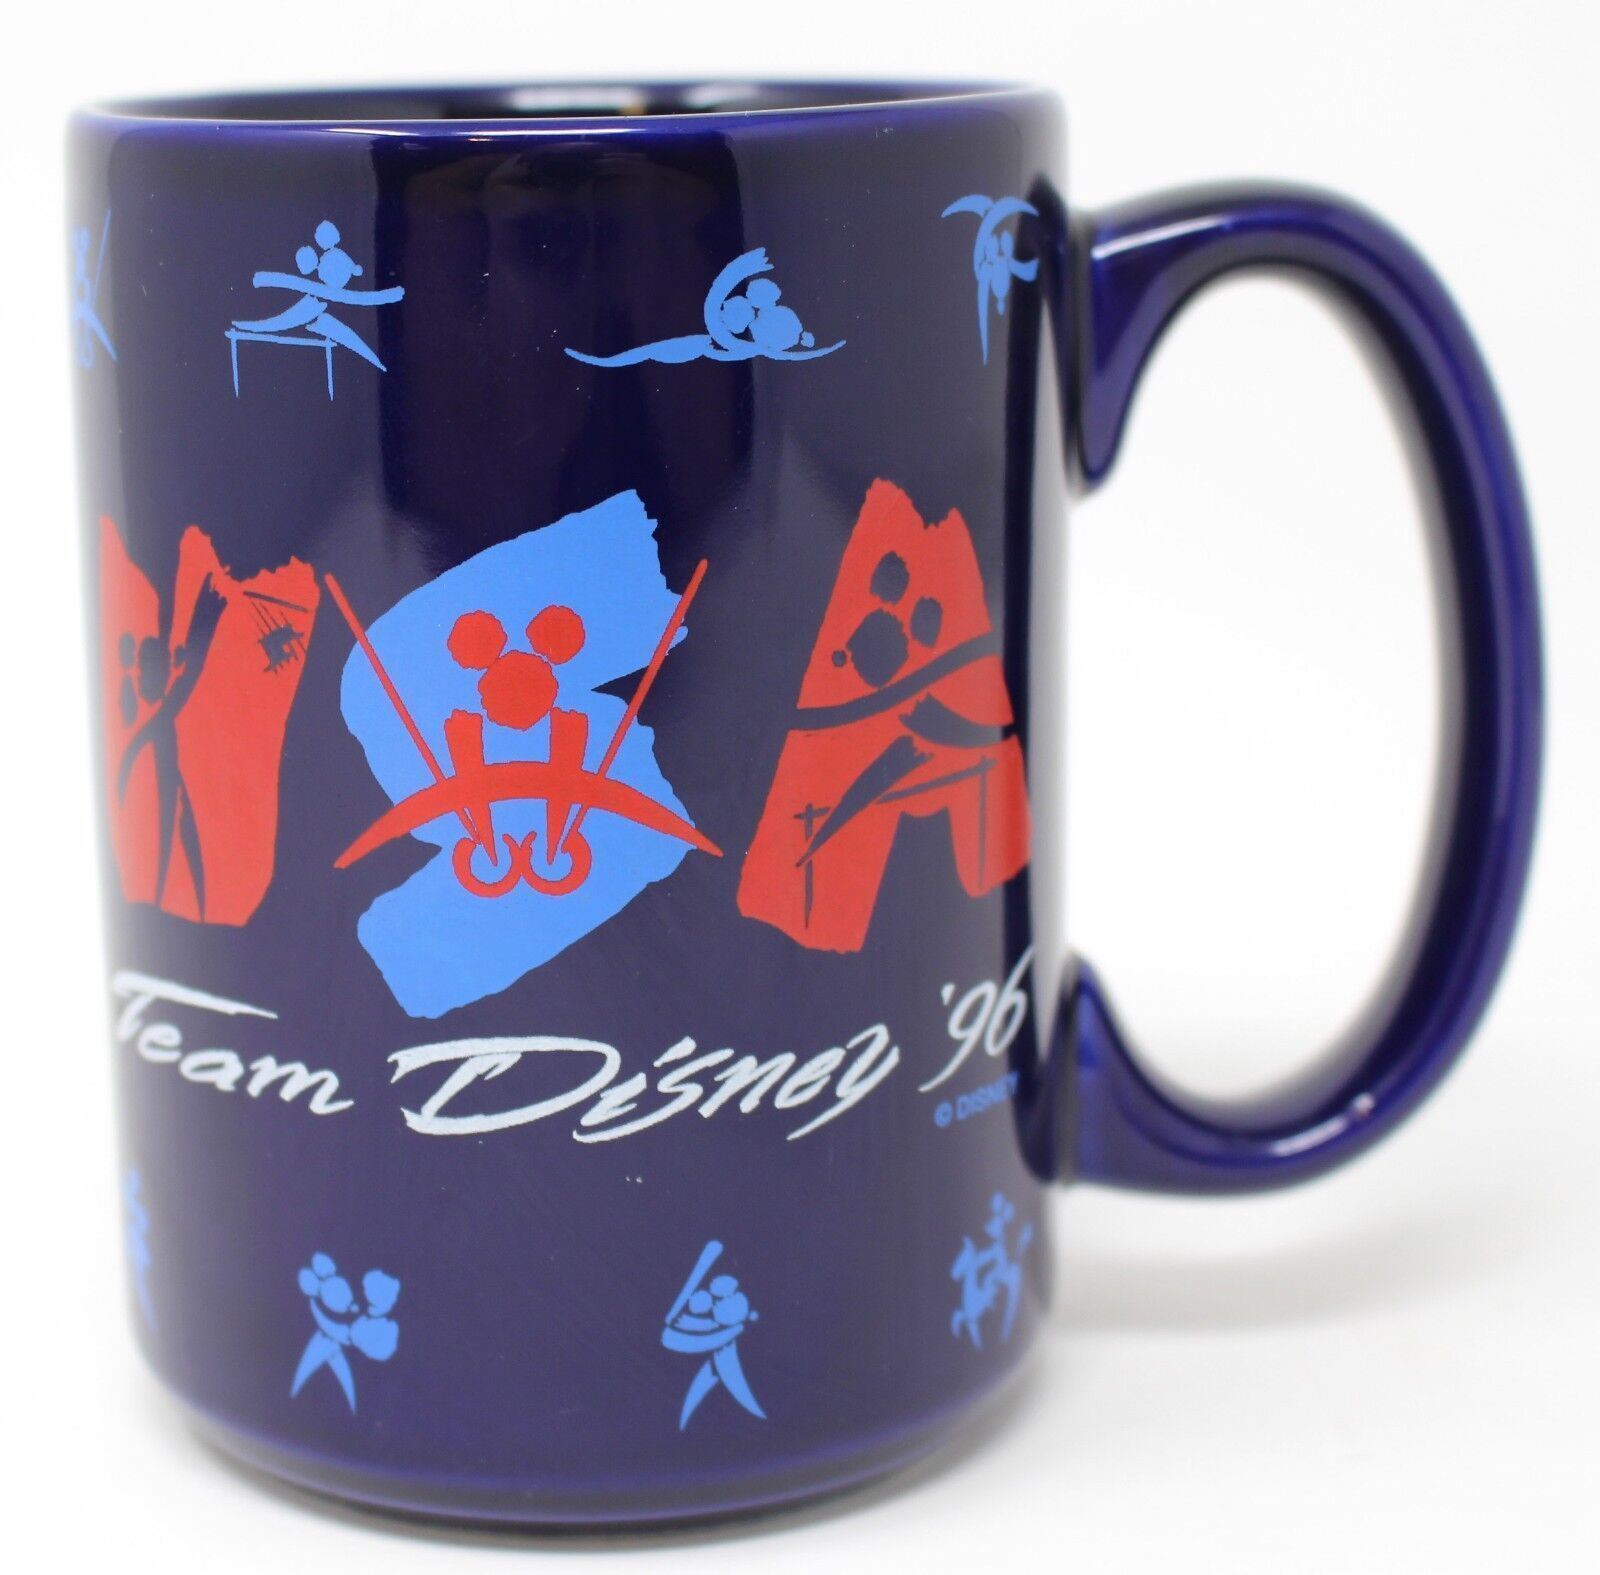 Primary image for Team Disney USA '96 Coffee Mug Cup 1996 Olympics Mickey Mouse Blue